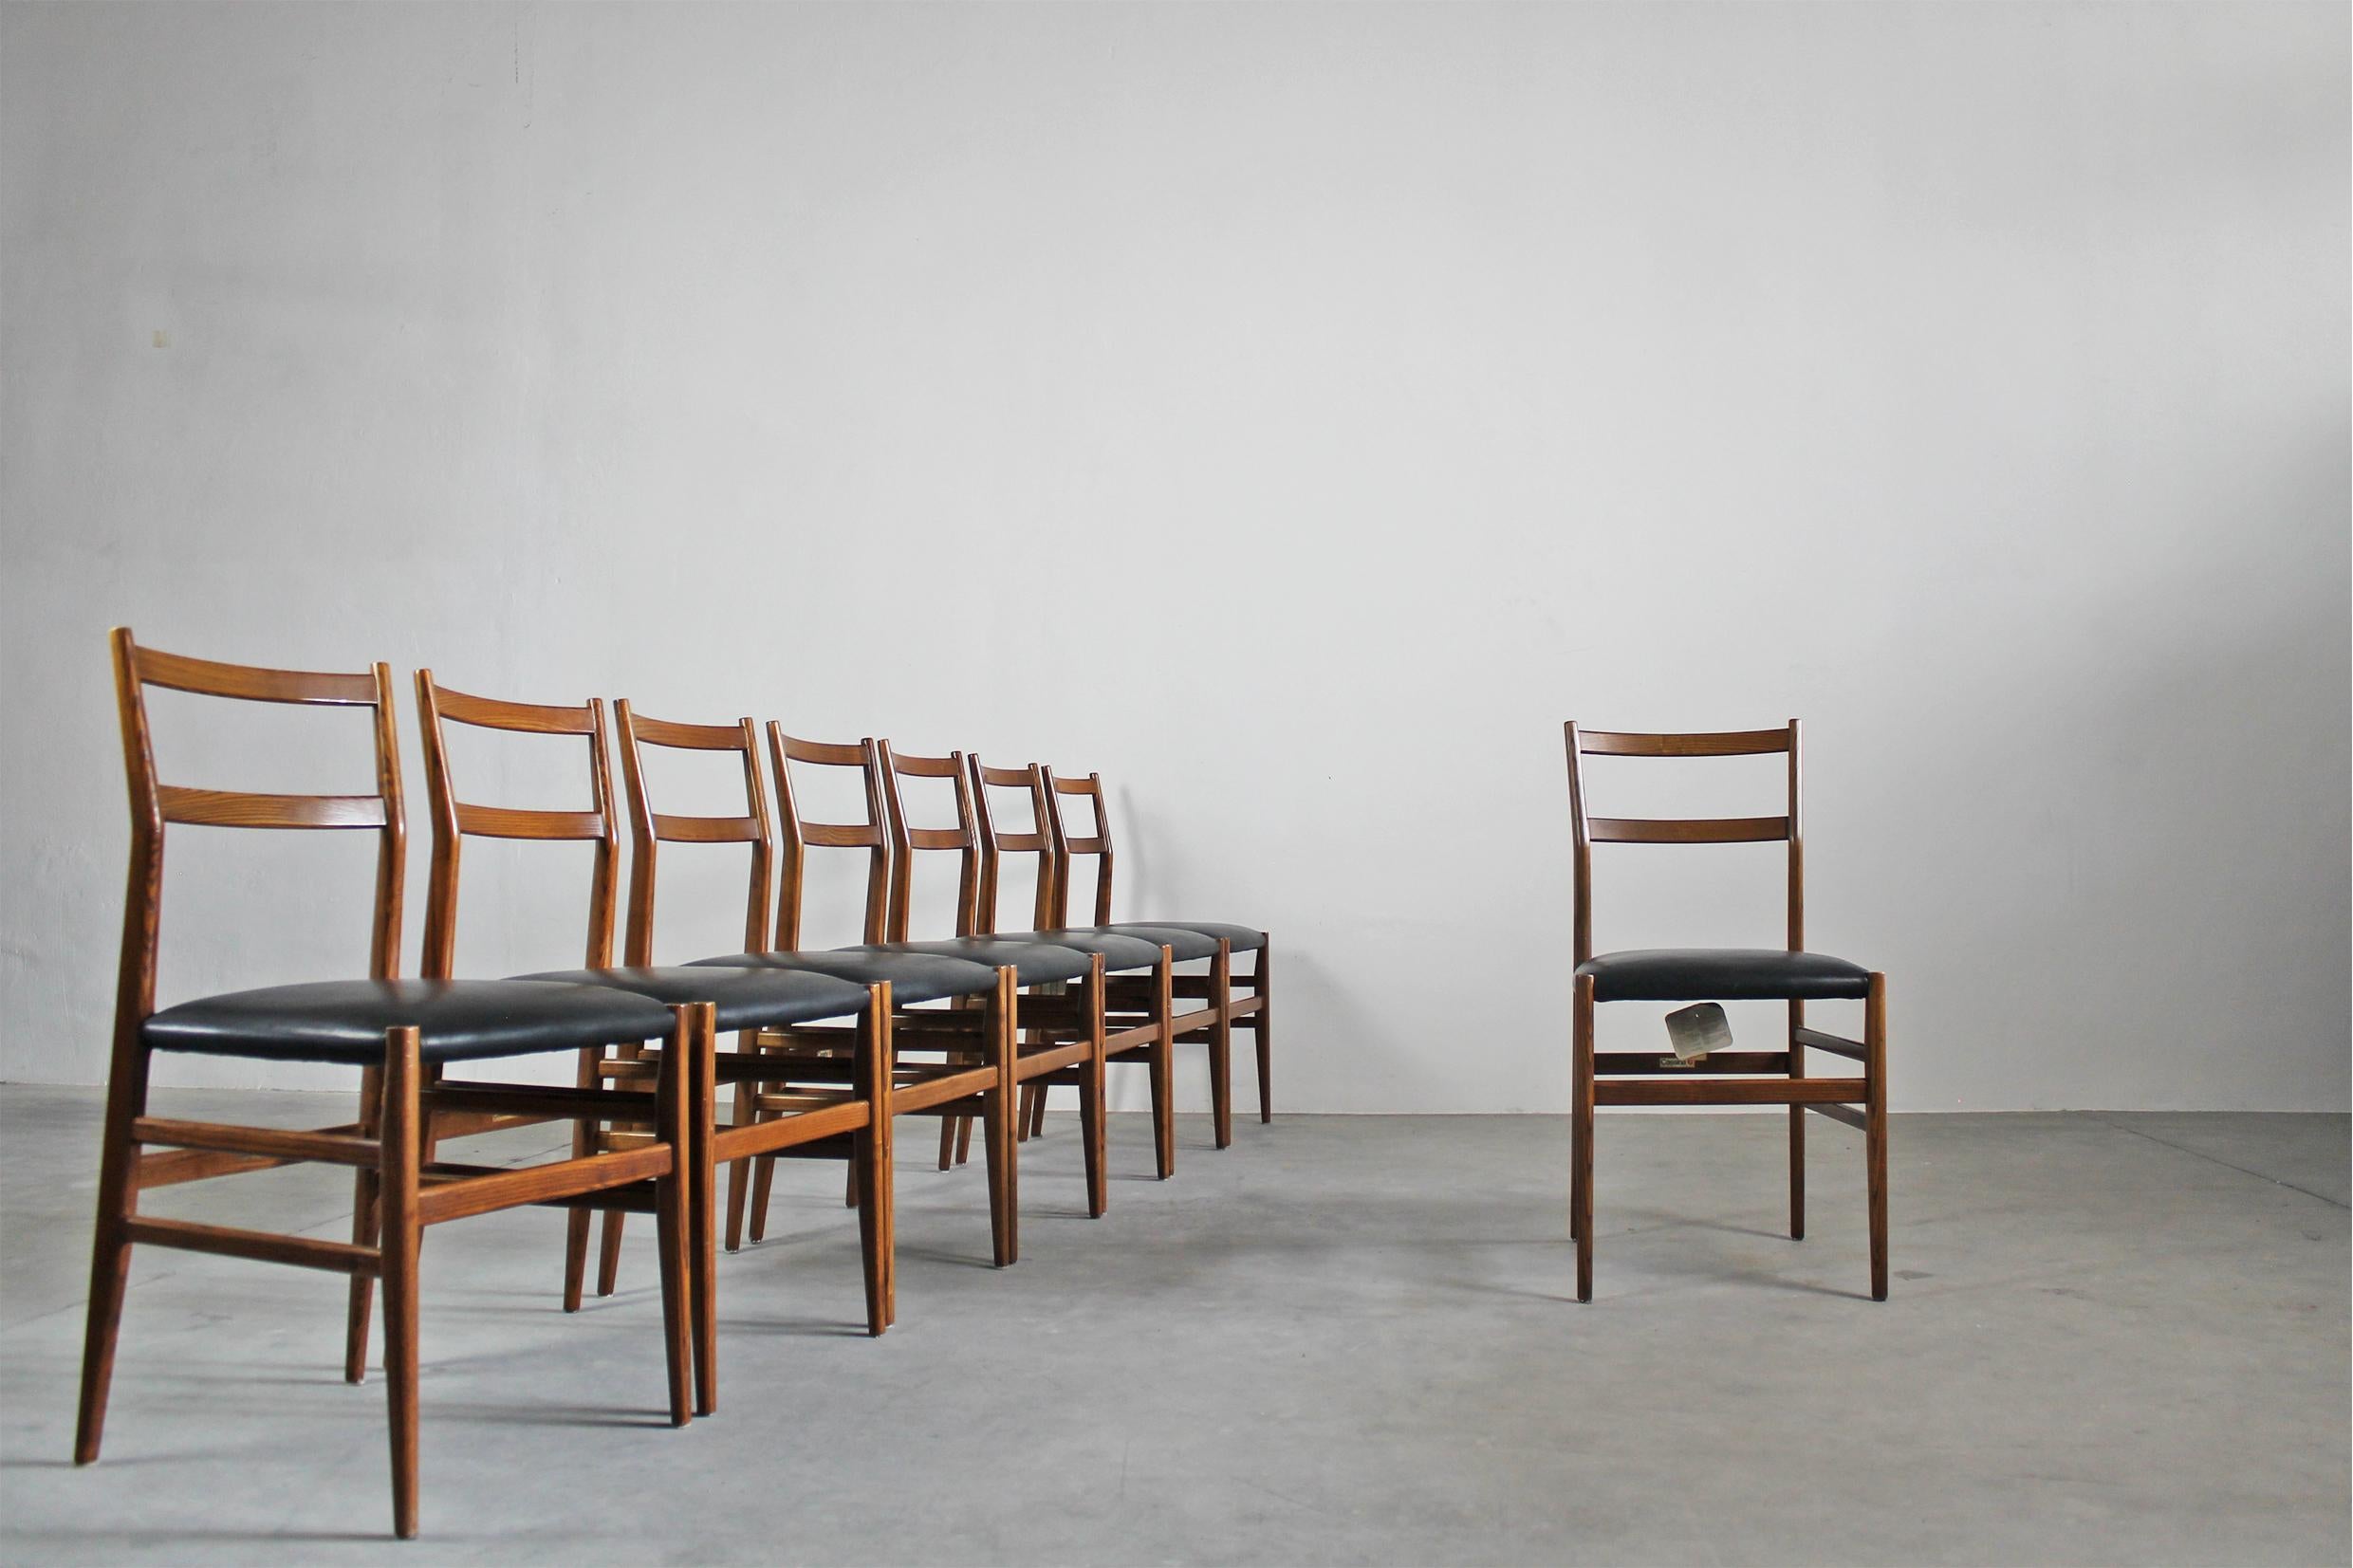 Set of eight Leggera dining chairs with a wooden structure and seat upholstered in black leather, designed by Gio Ponti for Cassina, 1970s. 
Leggera is a simple chair, with a polite, clear, cultured shape, strong in its past as a design icon. The